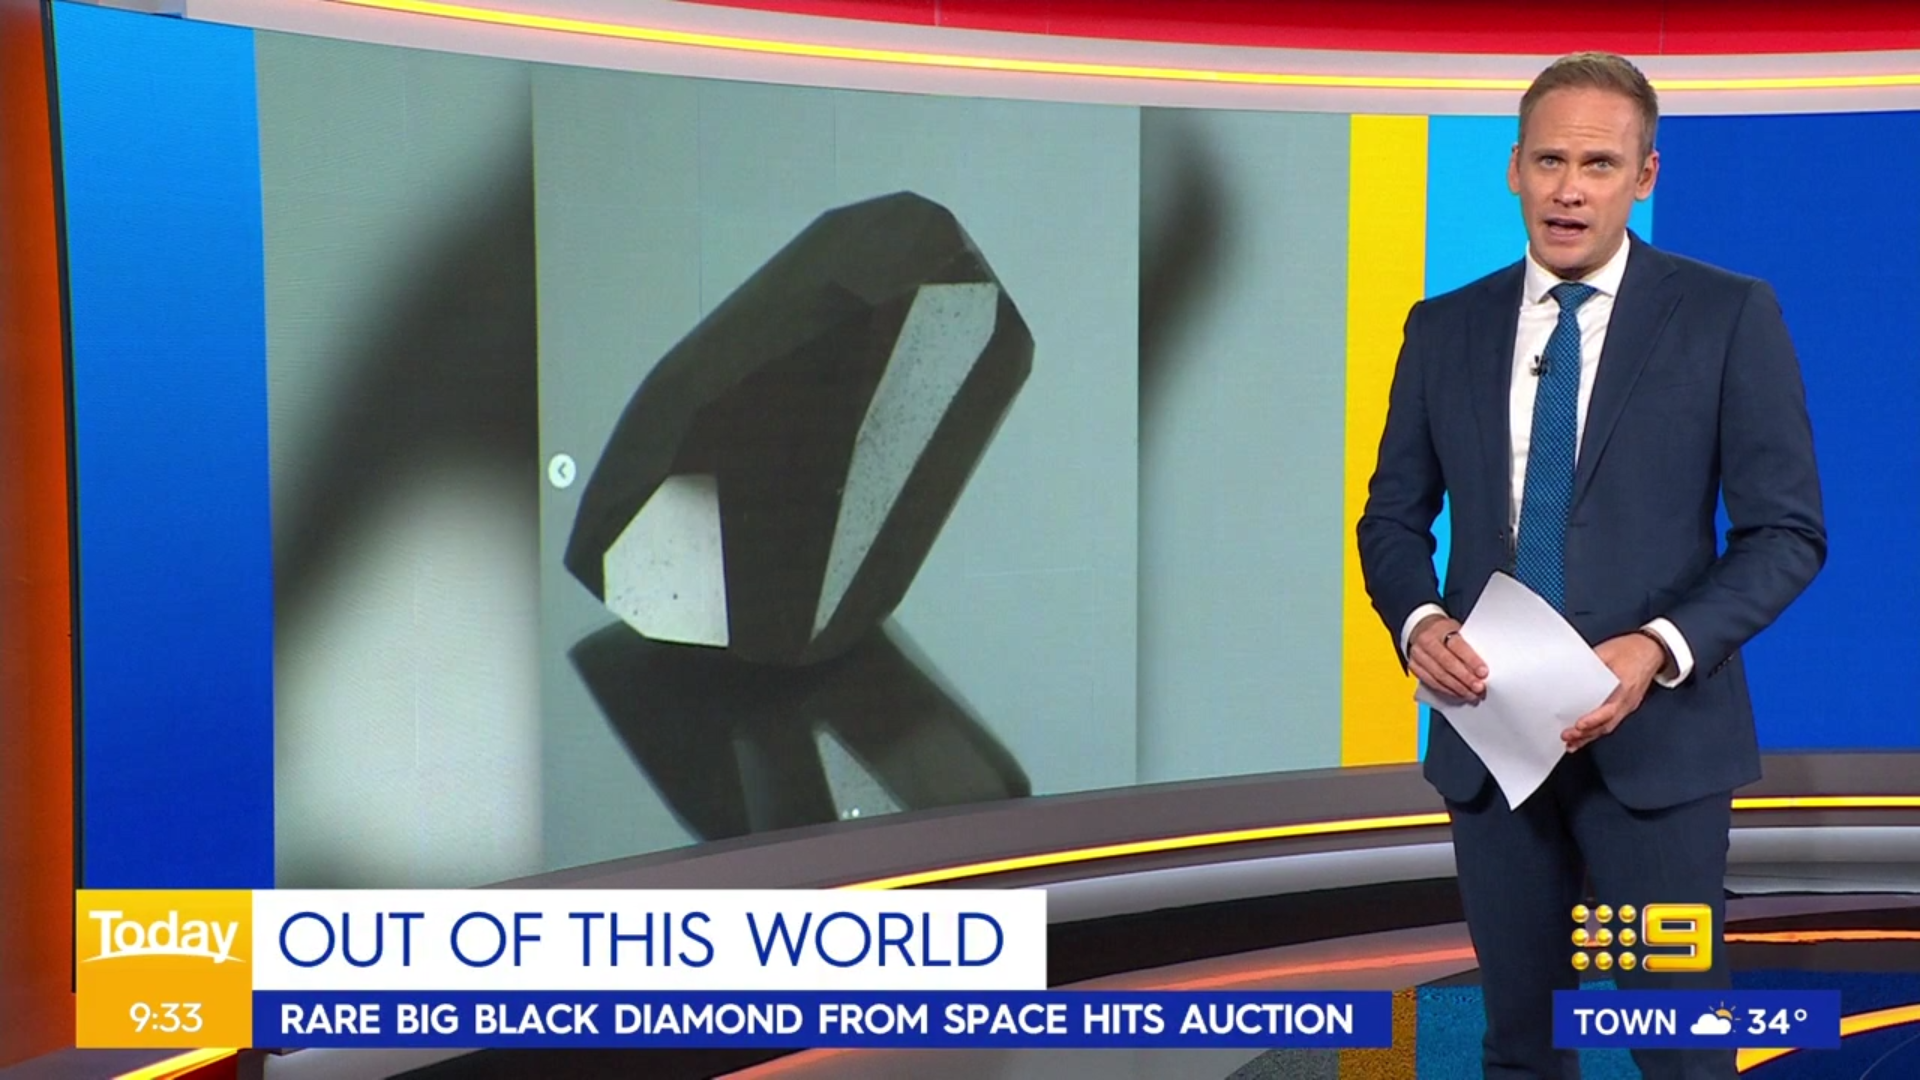 Black diamond worth $10m up for auction at Sotheby's